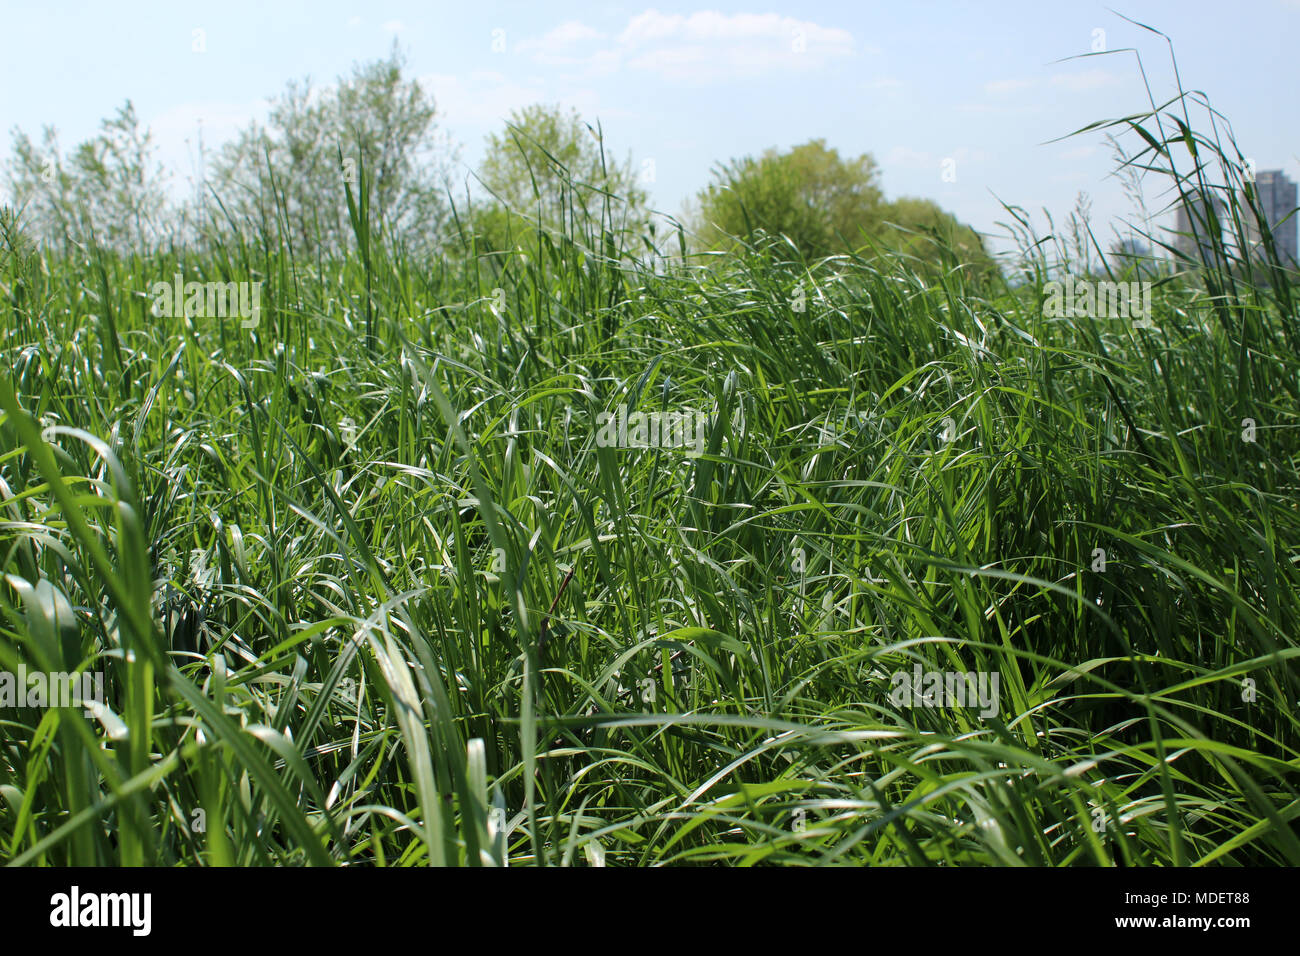 Tall grass swaying in gentle breeze Stock Photo